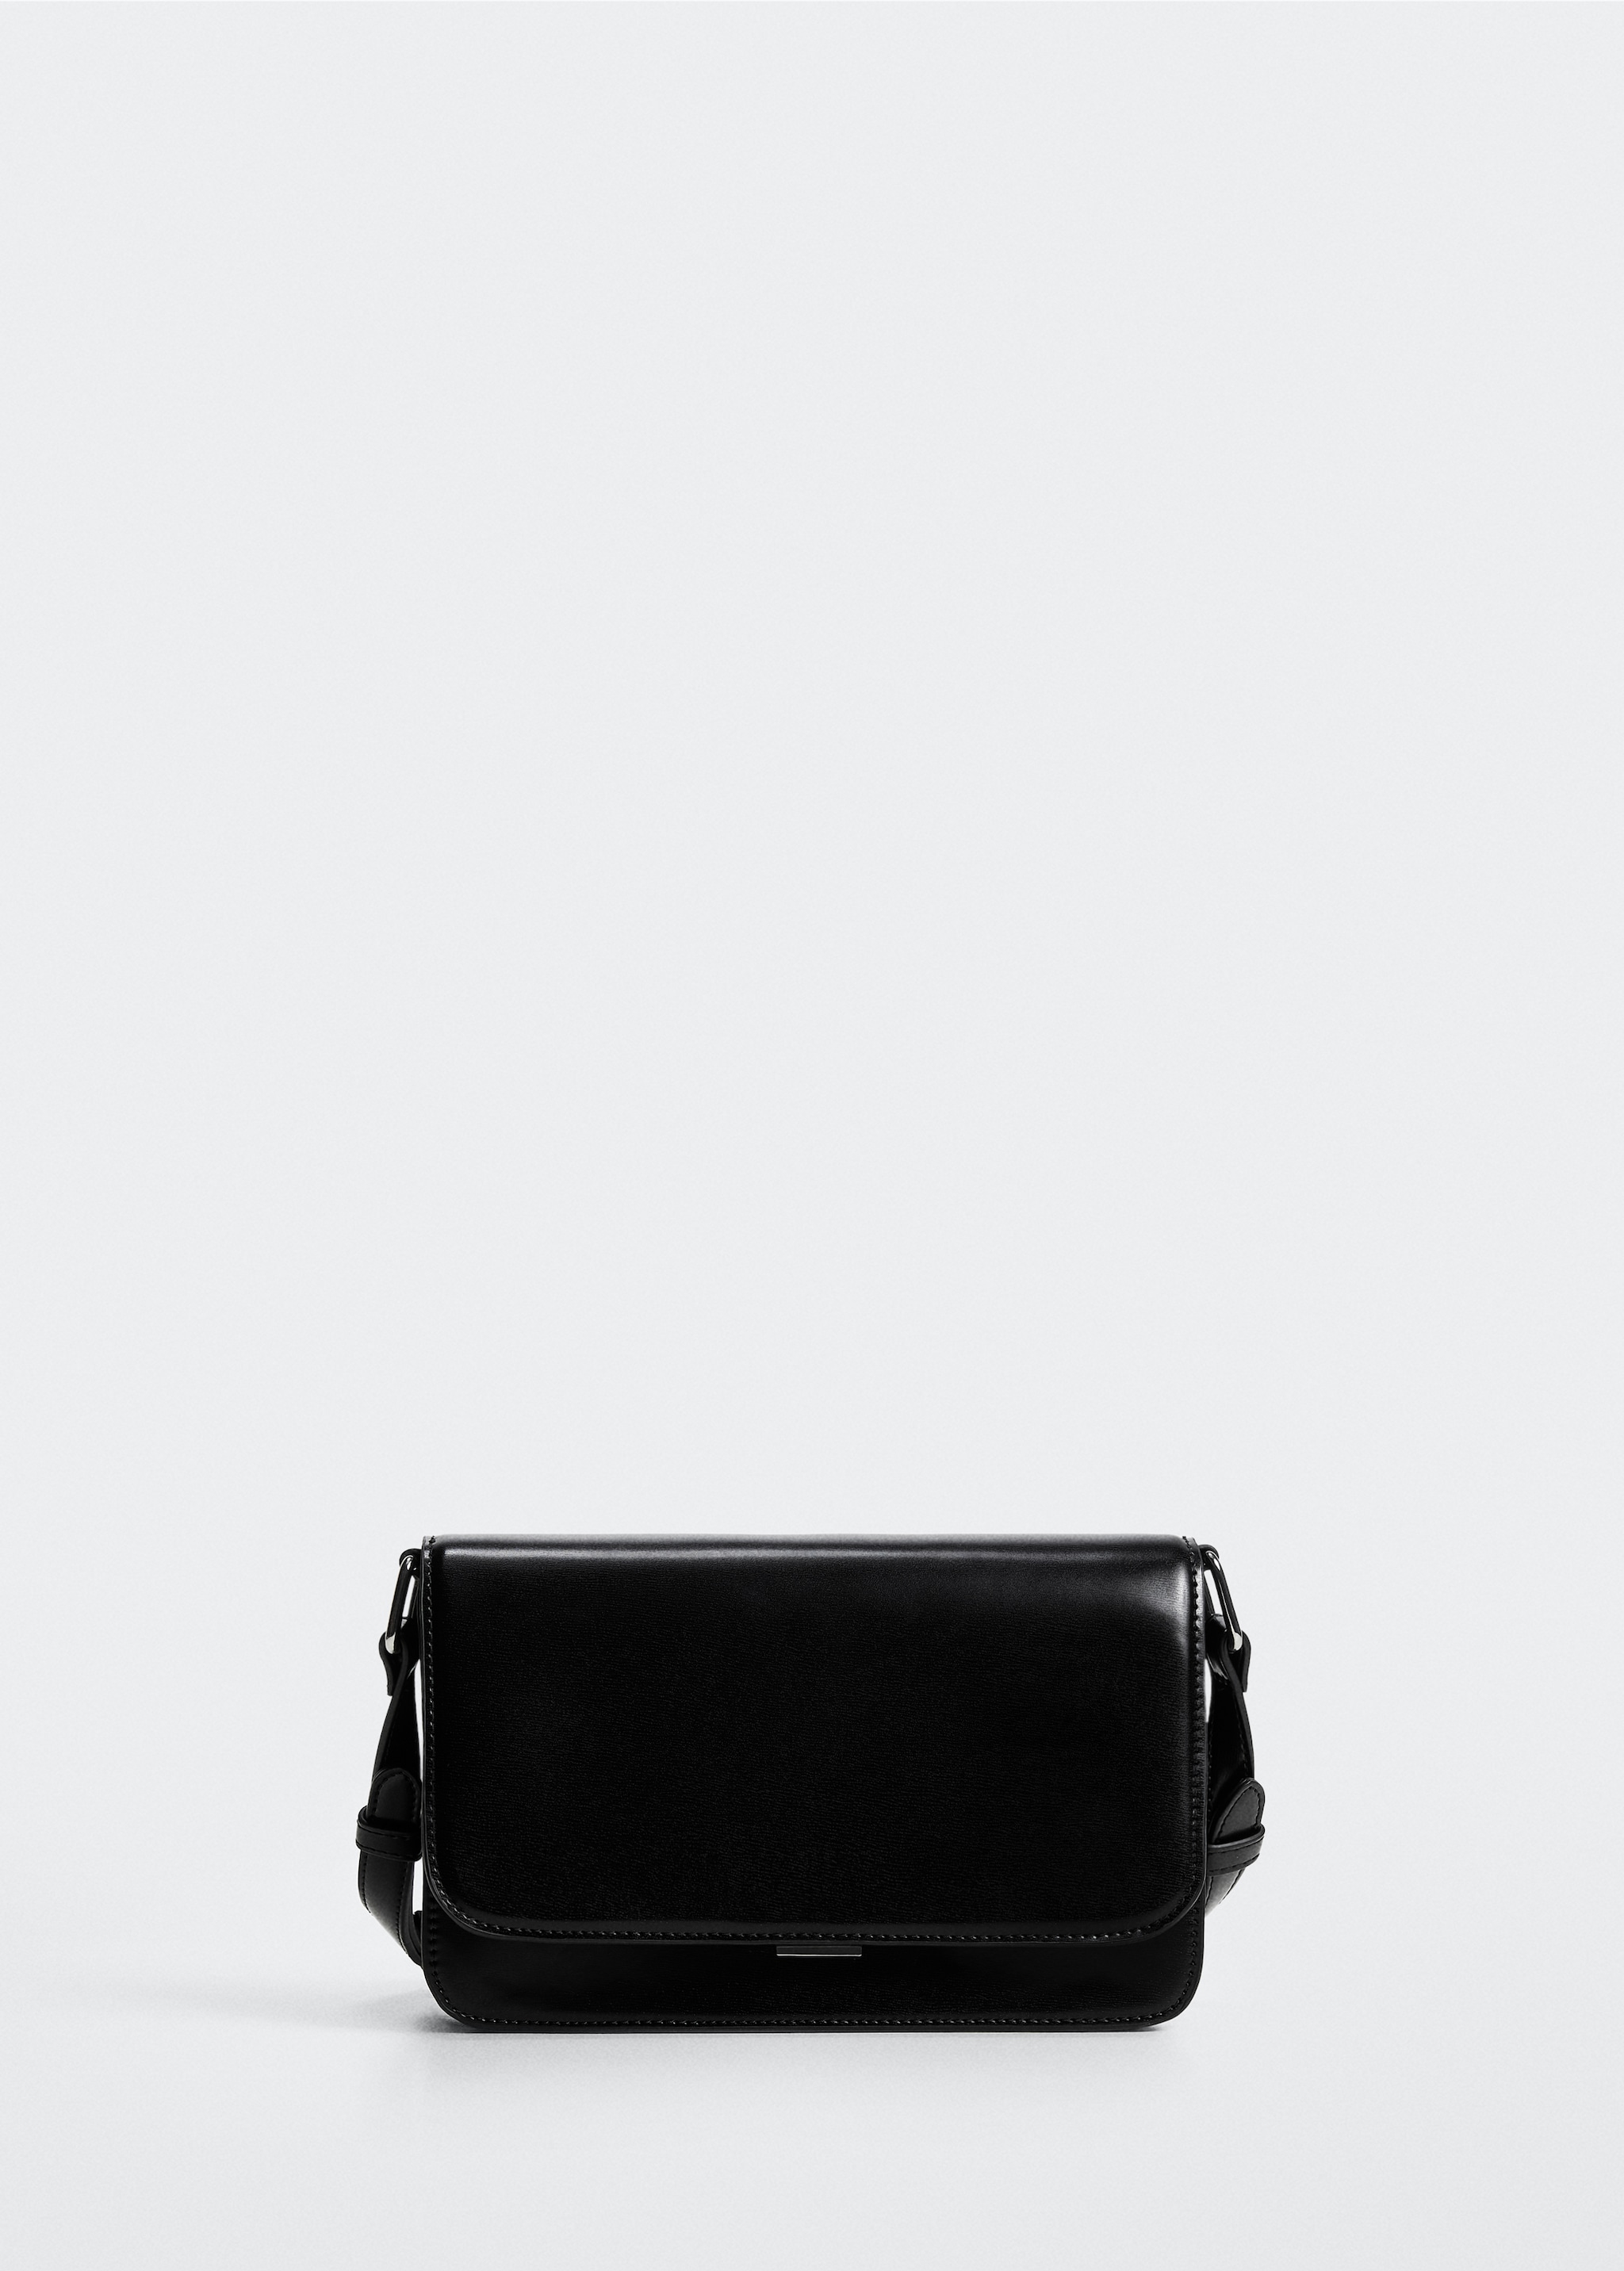 Shoulder bag with strap - Article without model